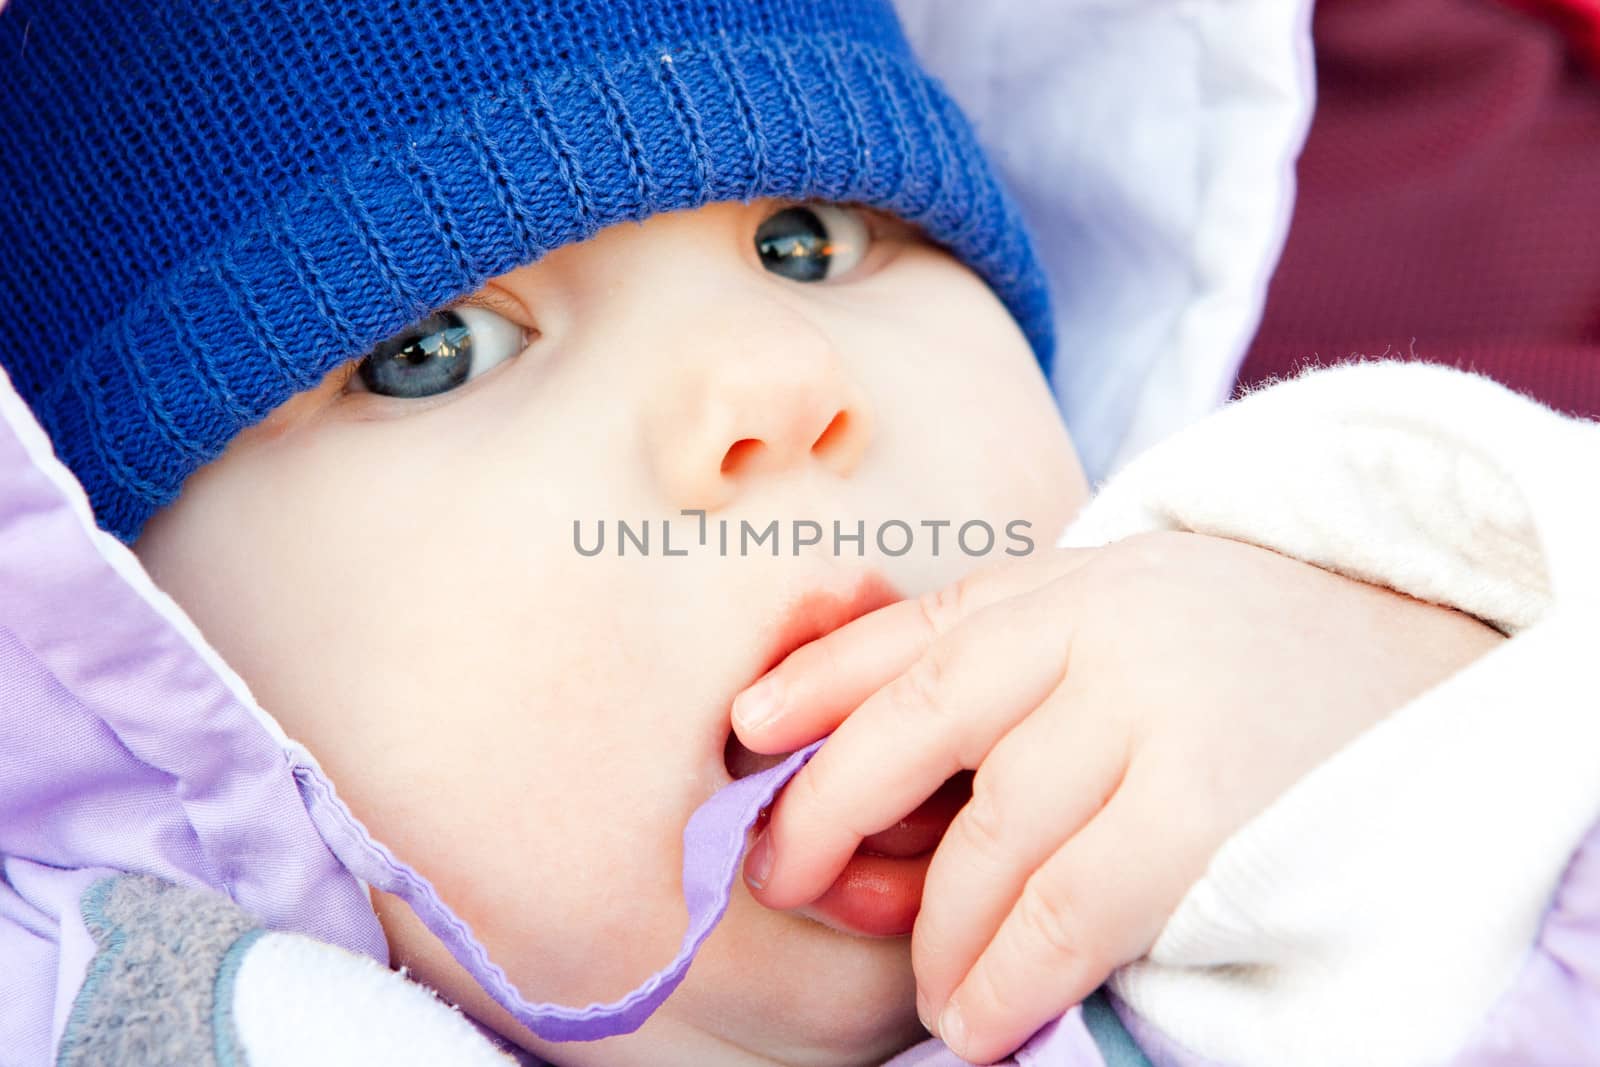 look of a baby by vsurkov